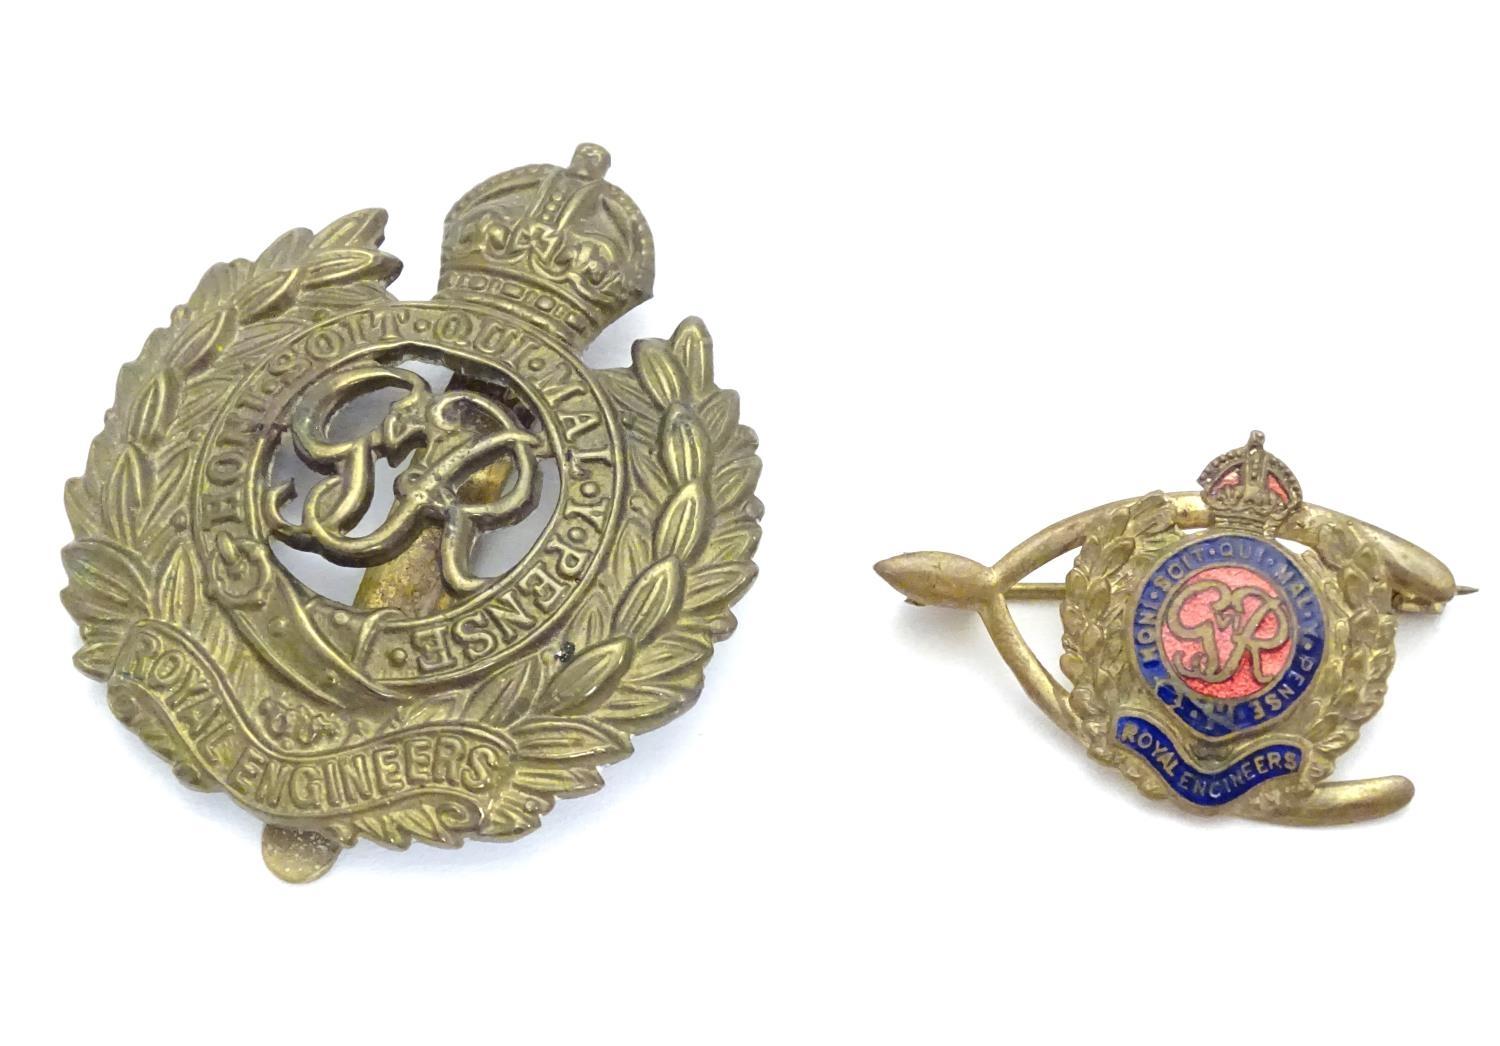 Militaria : a mid-20thC brass Royal Engineers cap badge and lapel badge, the largest 1 5/8" wide |( - Image 3 of 6